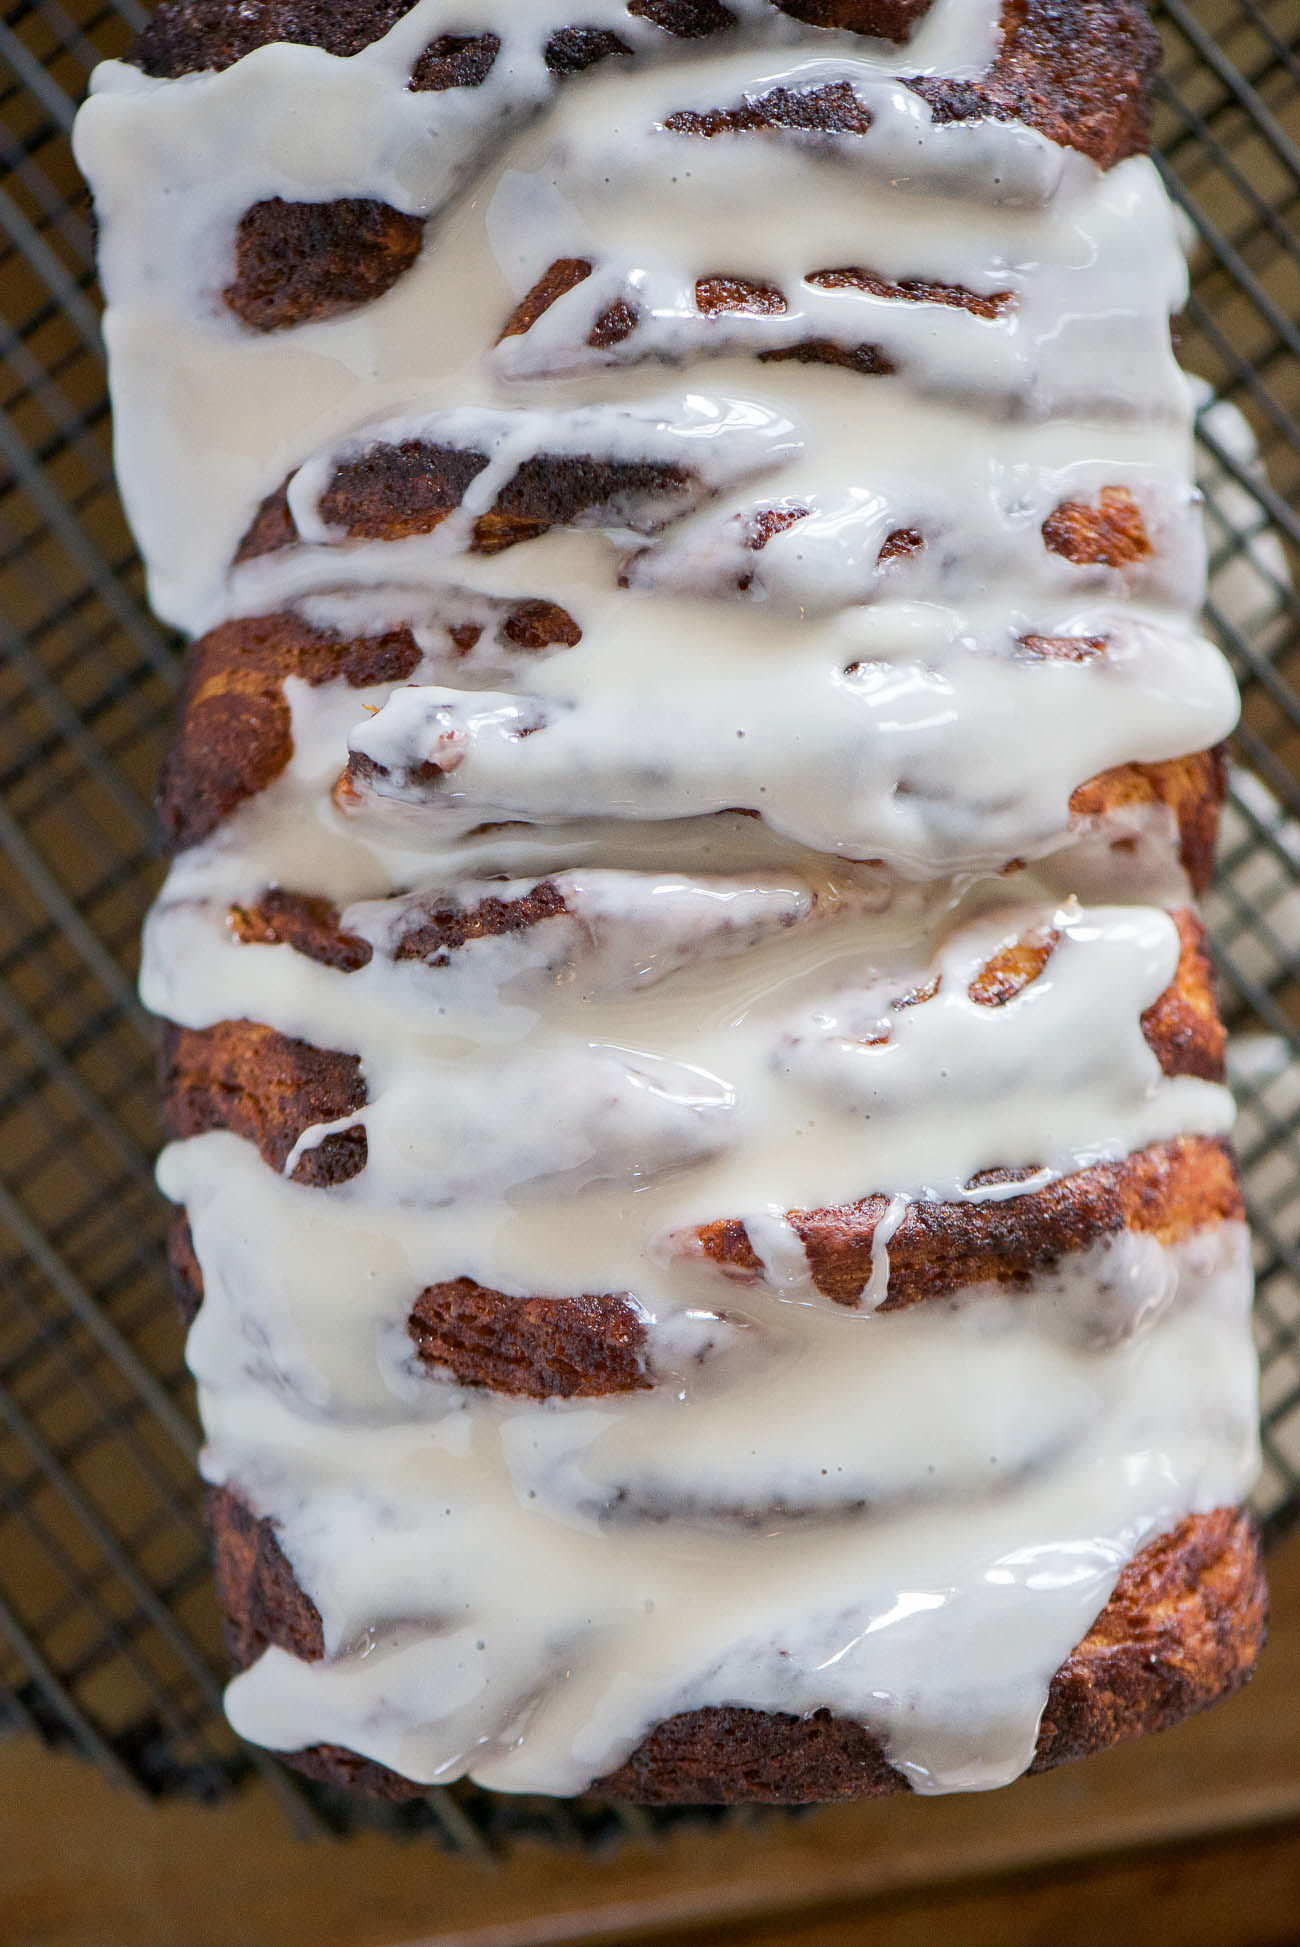 Lightened Up Cinnamon Roll Pull Apart Bread as the ooey gooey flavor of your favorite sweet rolls, but in an easy and fun loaf form! Flakey biscuits layered with a lightened up cinnamon sugar mixture and drizzled in a delicious glaze! The perfect treat for any morning!